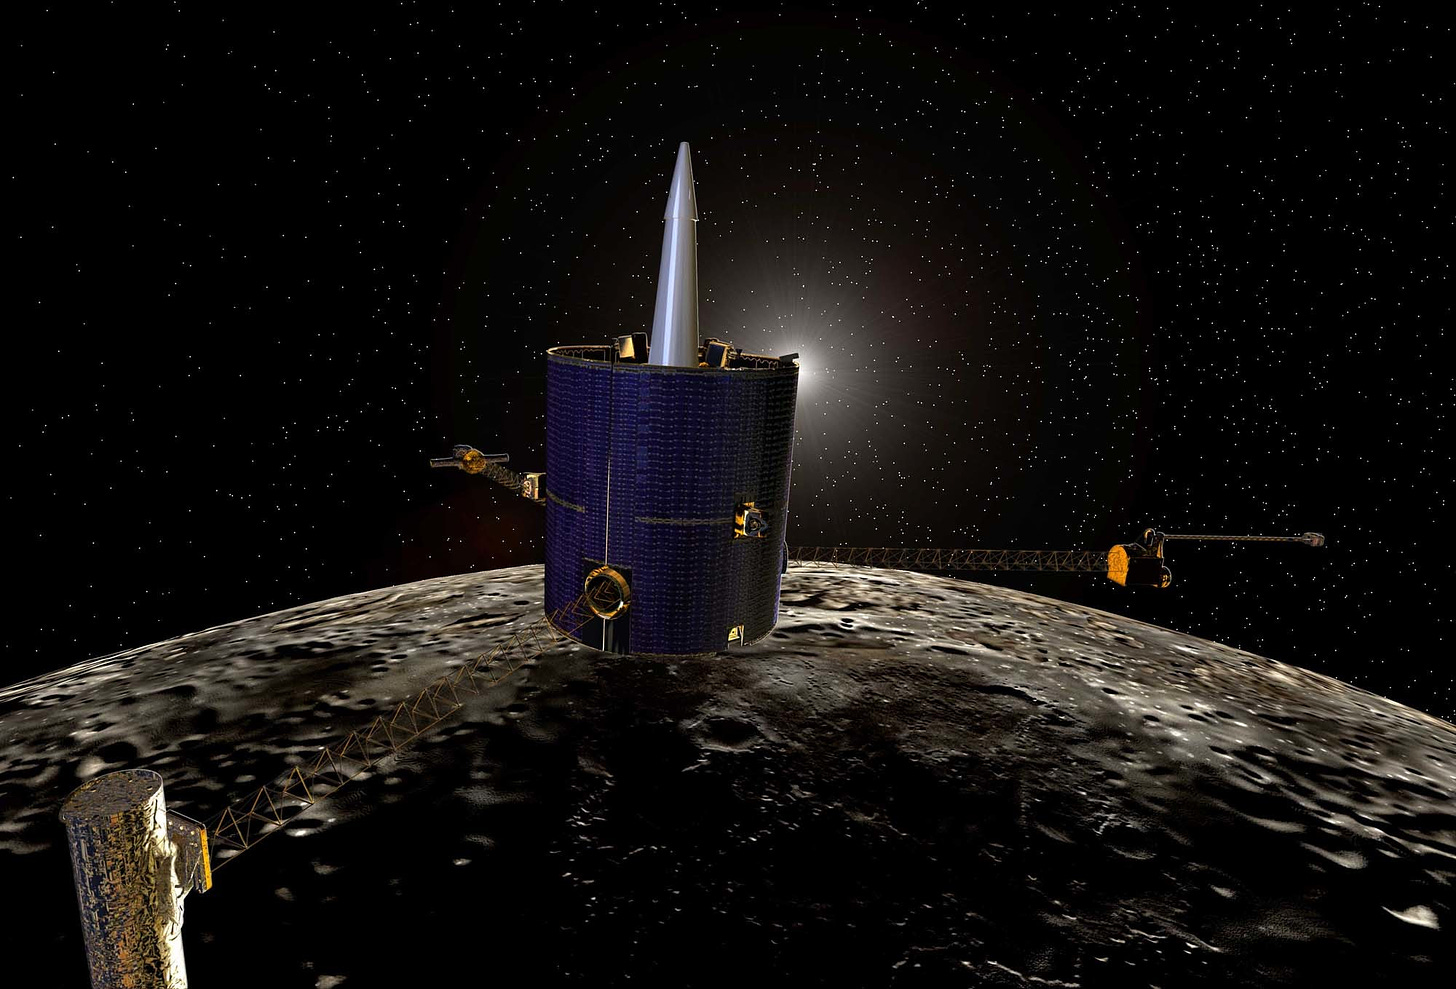 A computer-generated image of the Lunar Prospector spacecraft, shaped like a large blue cylinder with a silver spike protruding from one flat side. Three long arms extend from the rounded sides of the cylinder. The cratered lunar surface is in the background below a black sky full of stars, and the spacecraft is just blocking out the light of the sun.